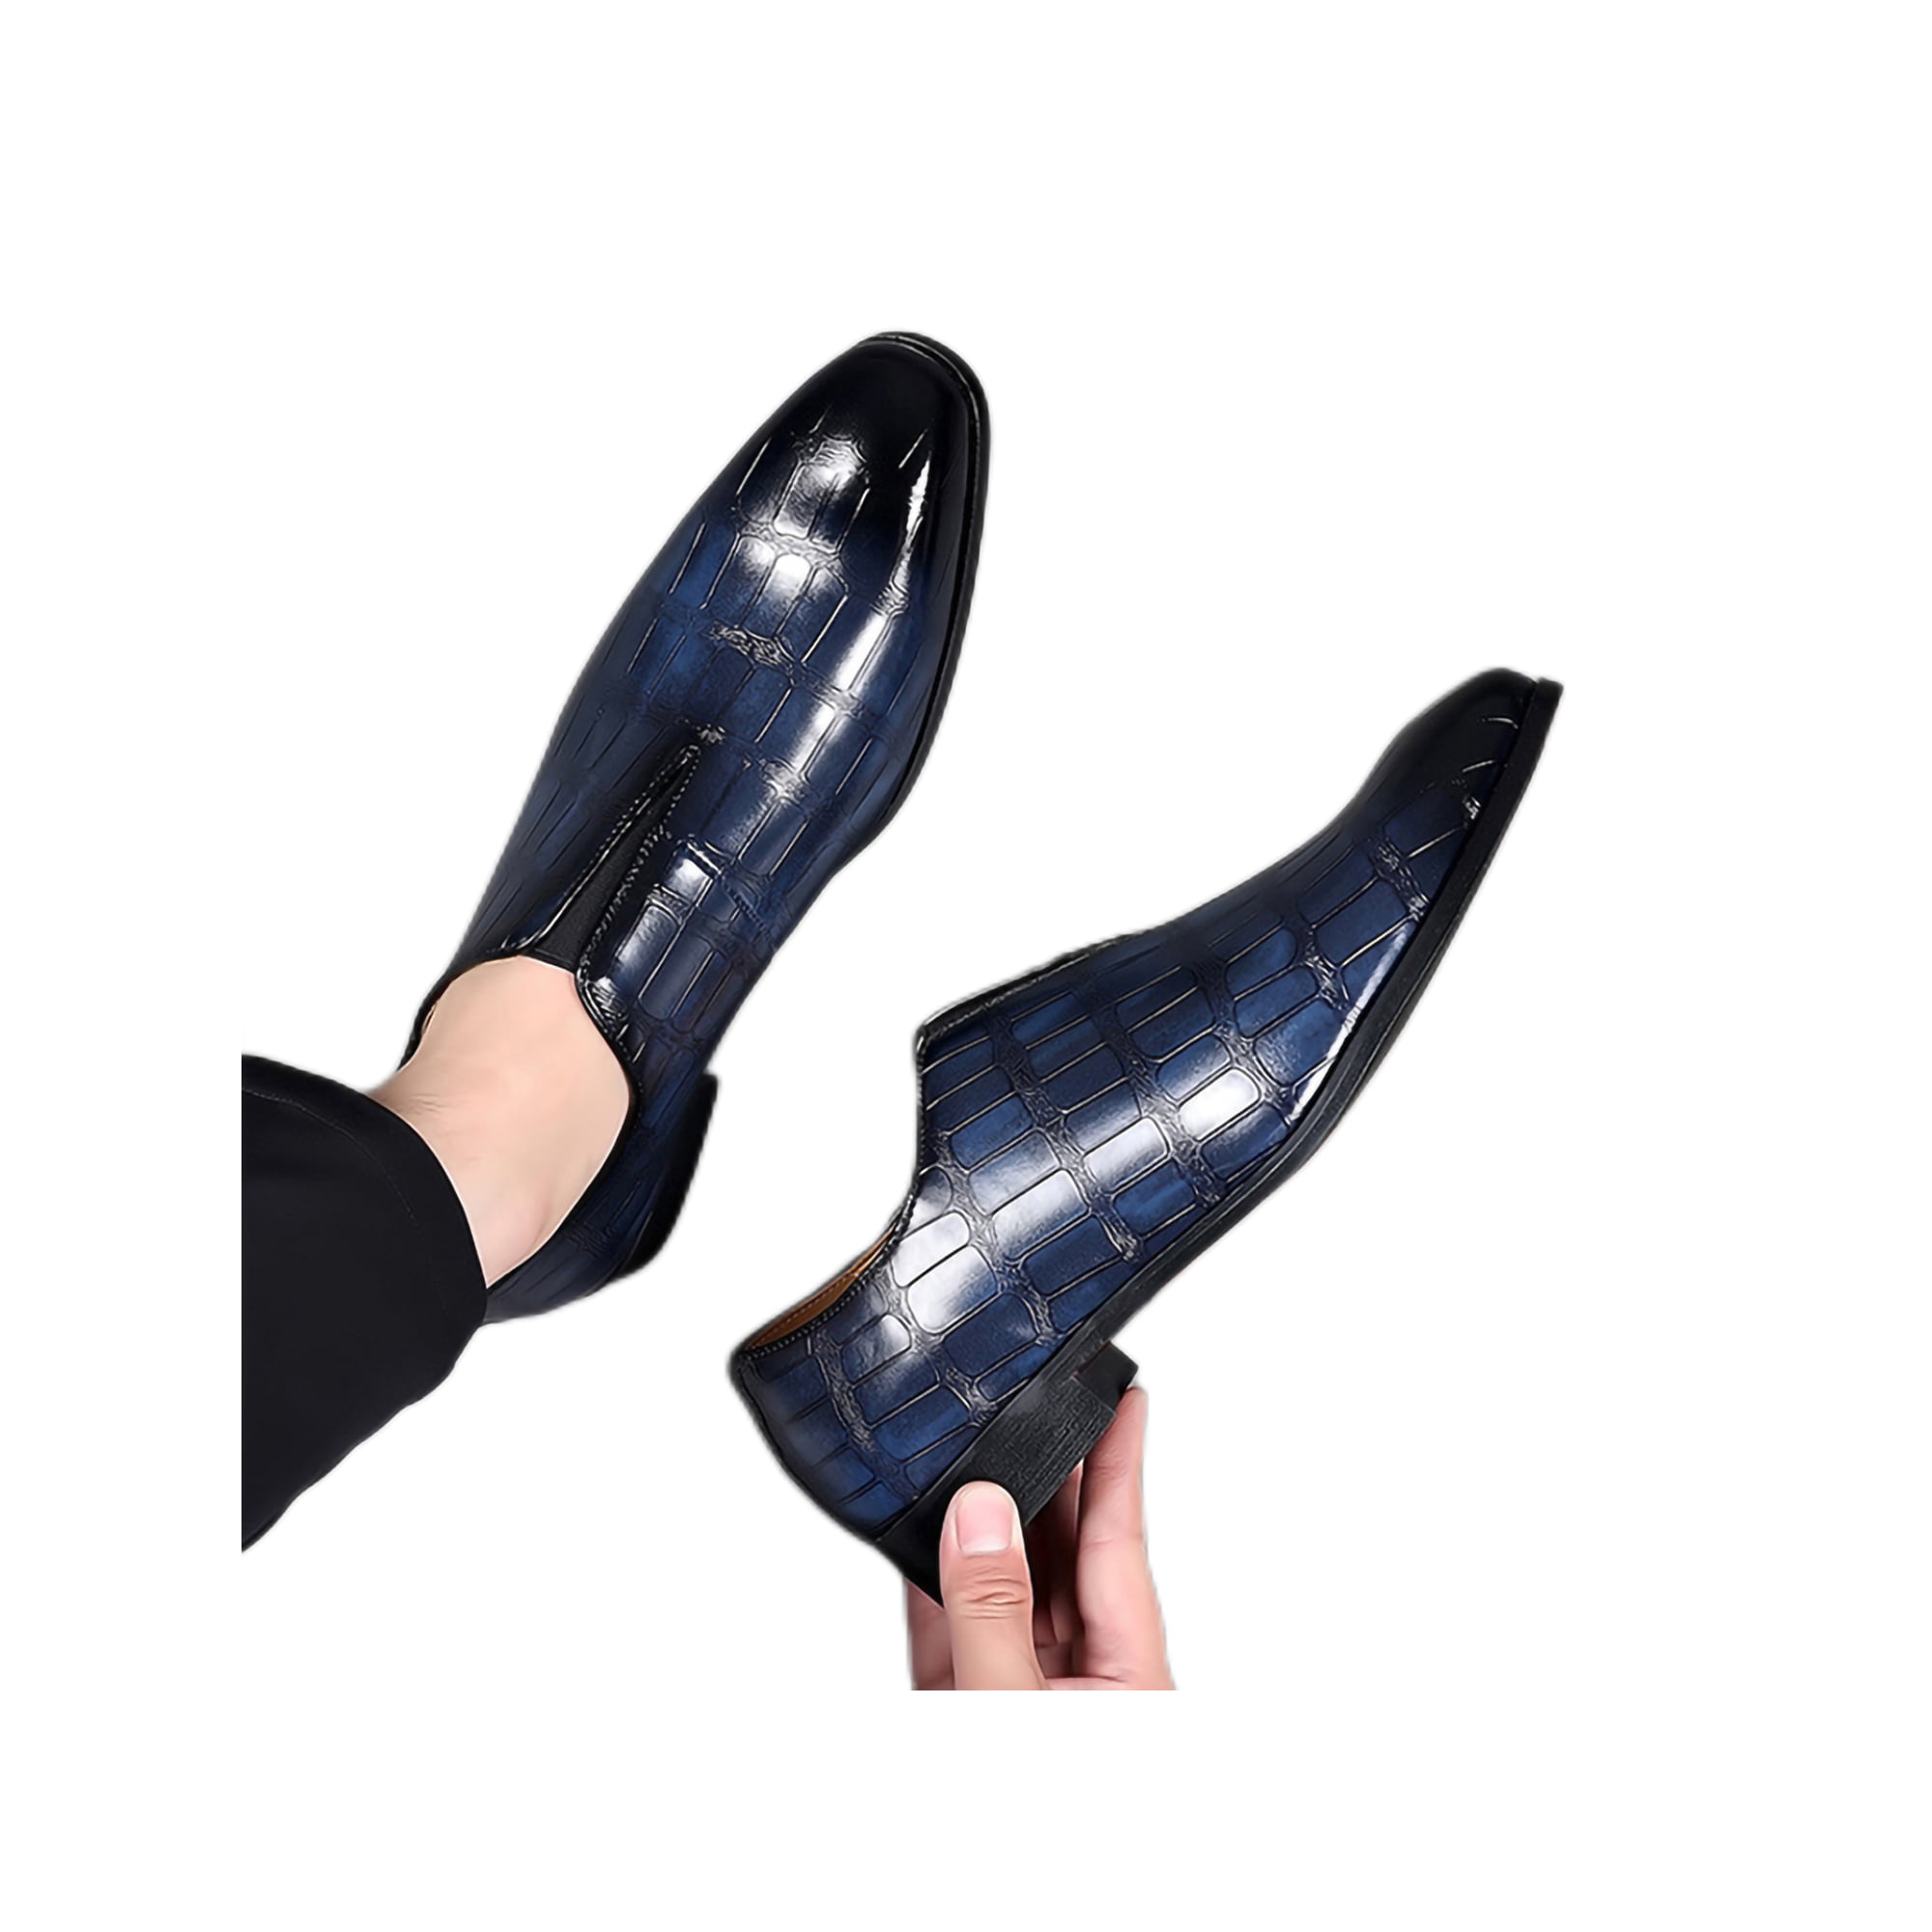 Men's Pointed Toe Shiny Leather Shoes Men's Business